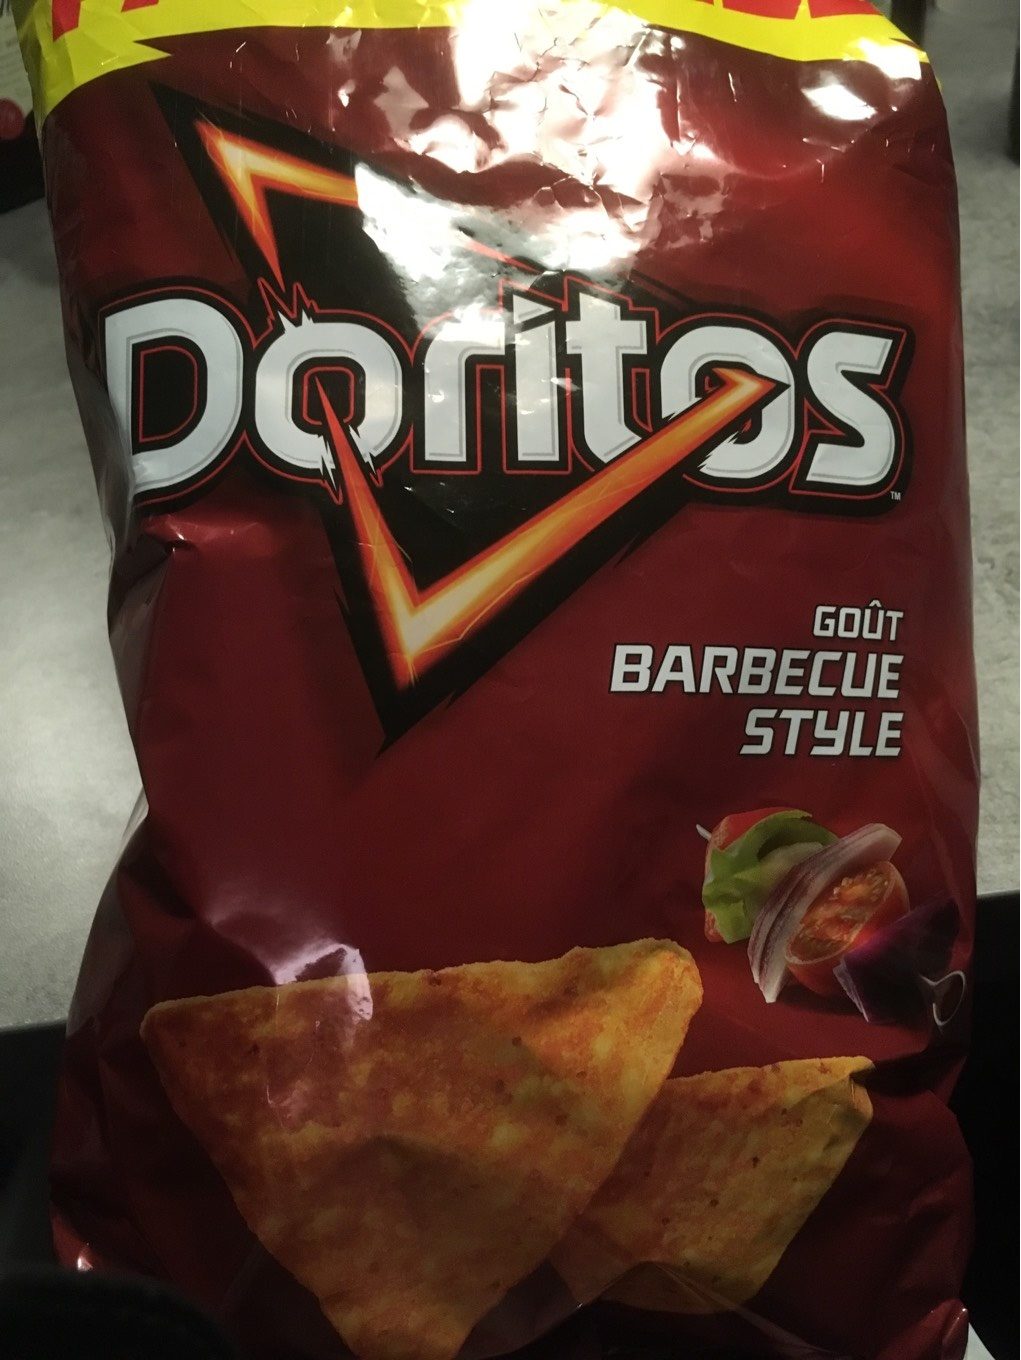 Doritos goût barbecue style party size - Product - fr